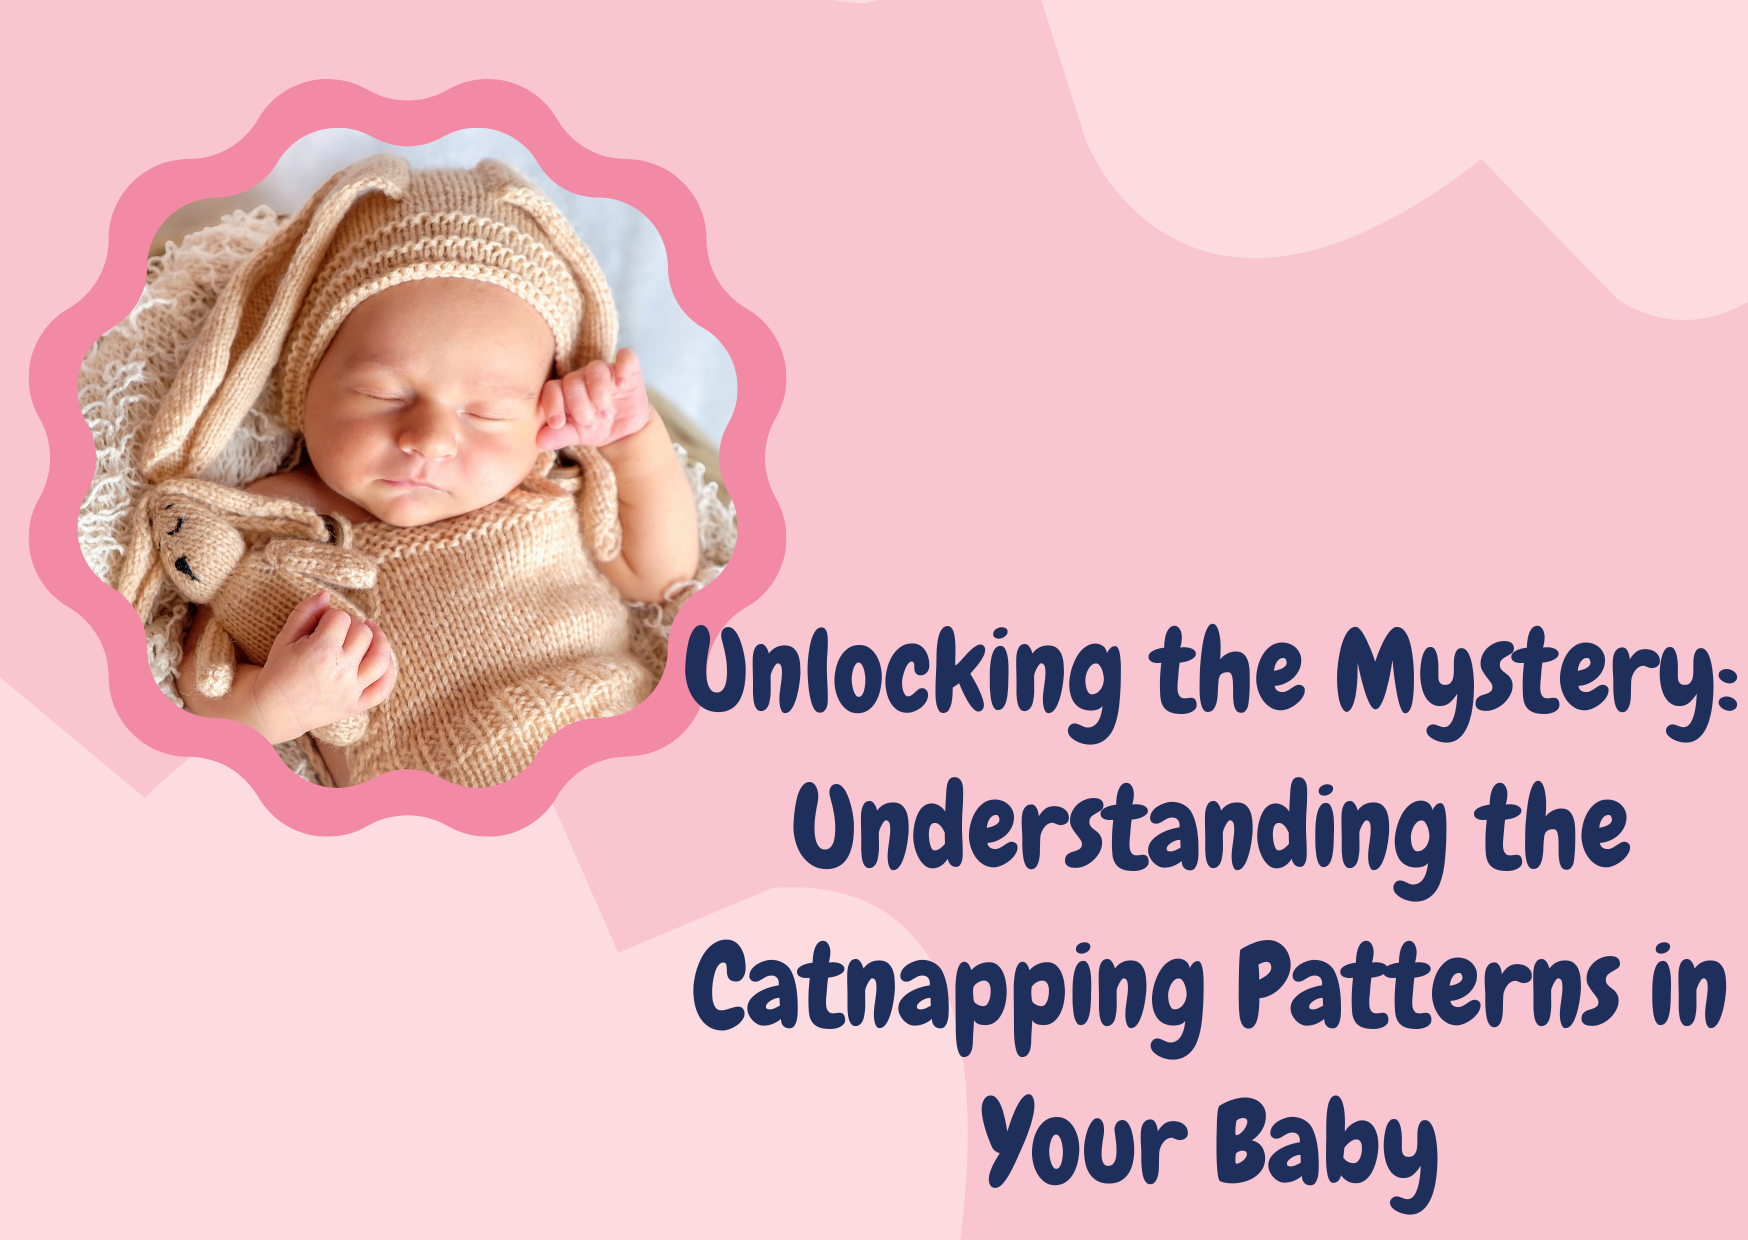 Unlocking the Mystery: Understanding the Catnapping Patterns in Your Baby